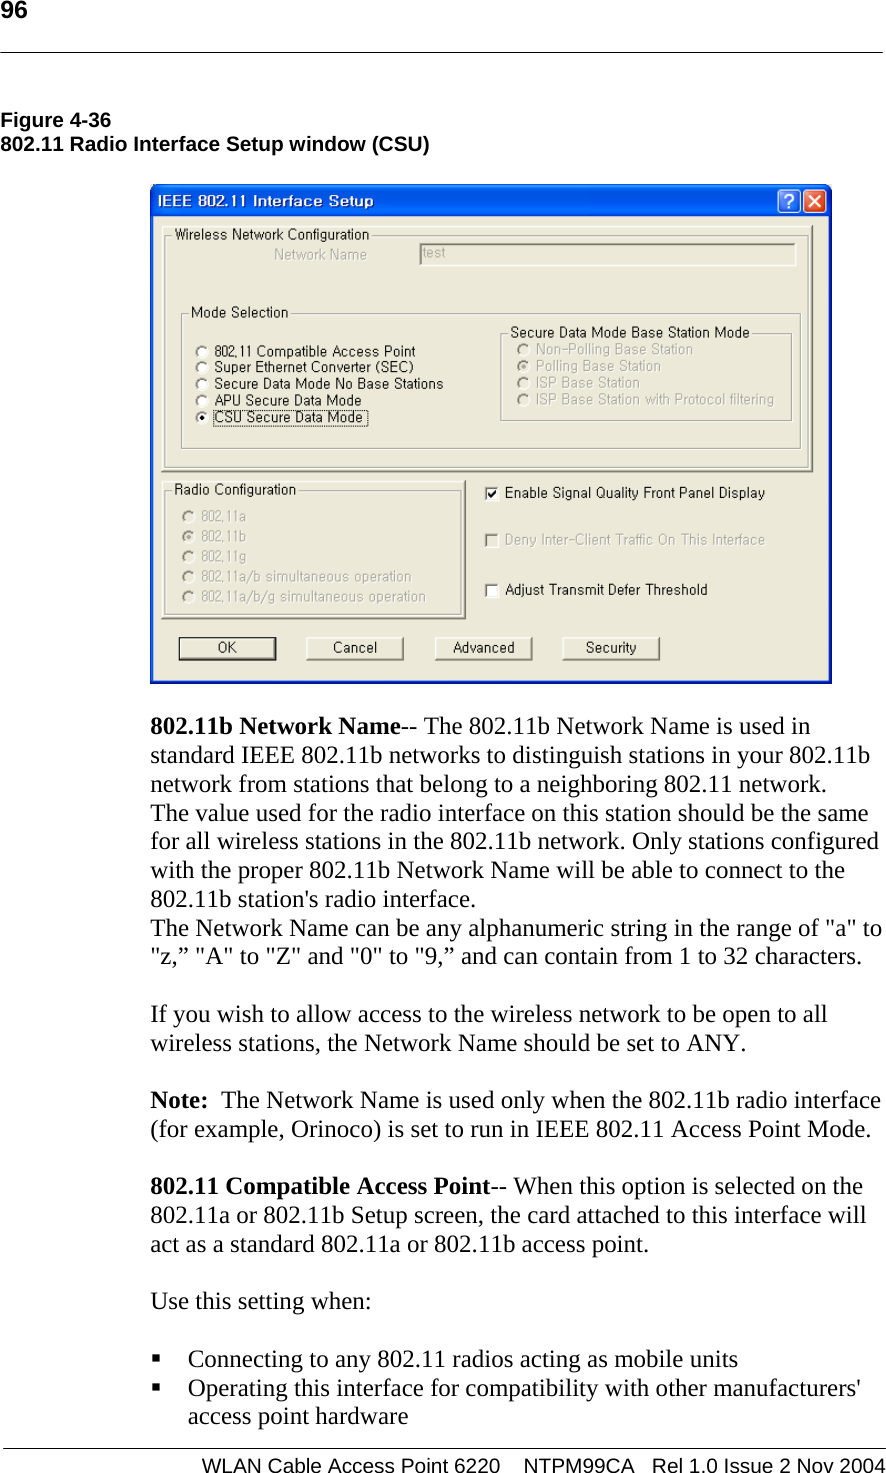   96  WLAN Cable Access Point 6220    NTPM99CA   Rel 1.0 Issue 2 Nov 2004 Figure 4-36 802.11 Radio Interface Setup window (CSU)     802.11b Network Name-- The 802.11b Network Name is used in standard IEEE 802.11b networks to distinguish stations in your 802.11b network from stations that belong to a neighboring 802.11 network.  The value used for the radio interface on this station should be the same for all wireless stations in the 802.11b network. Only stations configured with the proper 802.11b Network Name will be able to connect to the 802.11b station&apos;s radio interface. The Network Name can be any alphanumeric string in the range of &quot;a&quot; to &quot;z,” &quot;A&quot; to &quot;Z&quot; and &quot;0&quot; to &quot;9,” and can contain from 1 to 32 characters.  If you wish to allow access to the wireless network to be open to all wireless stations, the Network Name should be set to ANY.  Note:  The Network Name is used only when the 802.11b radio interface (for example, Orinoco) is set to run in IEEE 802.11 Access Point Mode.    802.11 Compatible Access Point-- When this option is selected on the 802.11a or 802.11b Setup screen, the card attached to this interface will act as a standard 802.11a or 802.11b access point.   Use this setting when:   Connecting to any 802.11 radios acting as mobile units  Operating this interface for compatibility with other manufacturers&apos; access point hardware 